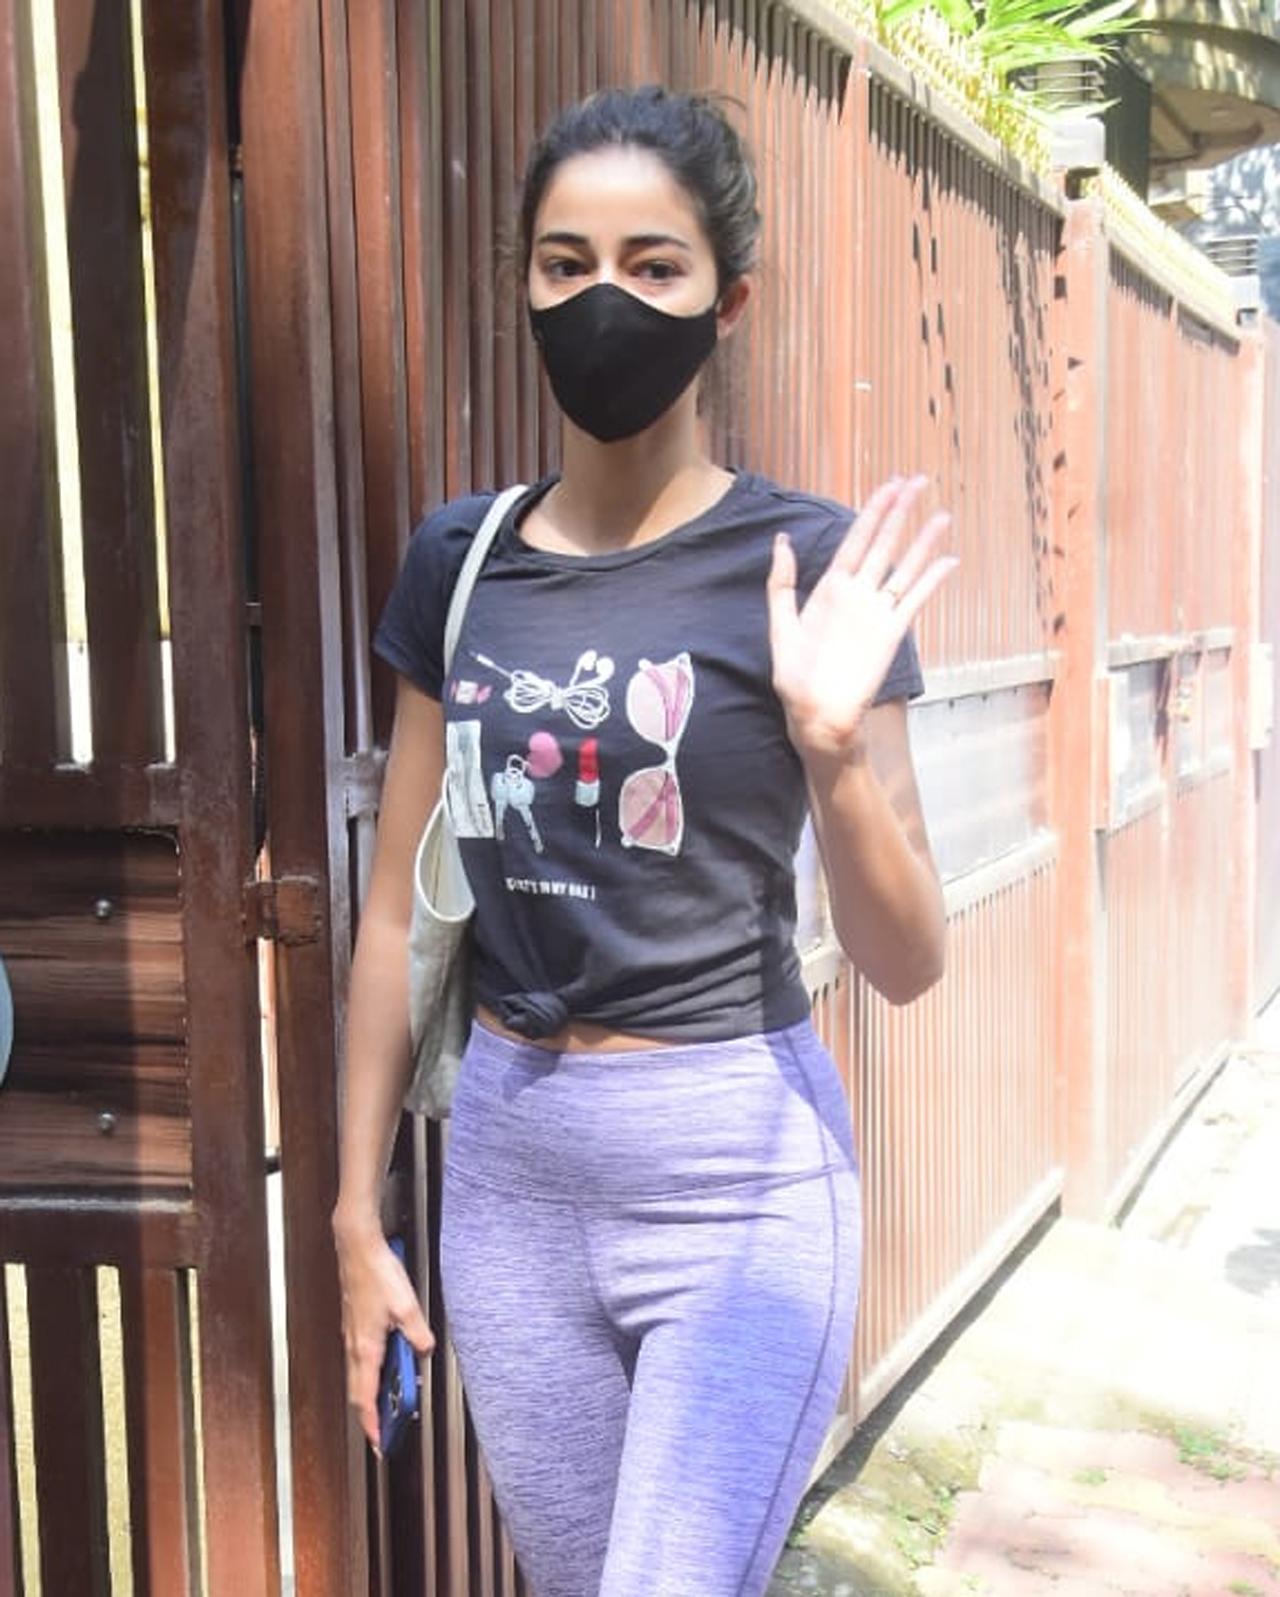 Ananya Panday was clicked in Bandra as she stepped out for her Yoga Classes. The actress opted for a simple grey t-shirt, paired with yoga pants. As usual, Ananya obliged for pictures for paparazzi.